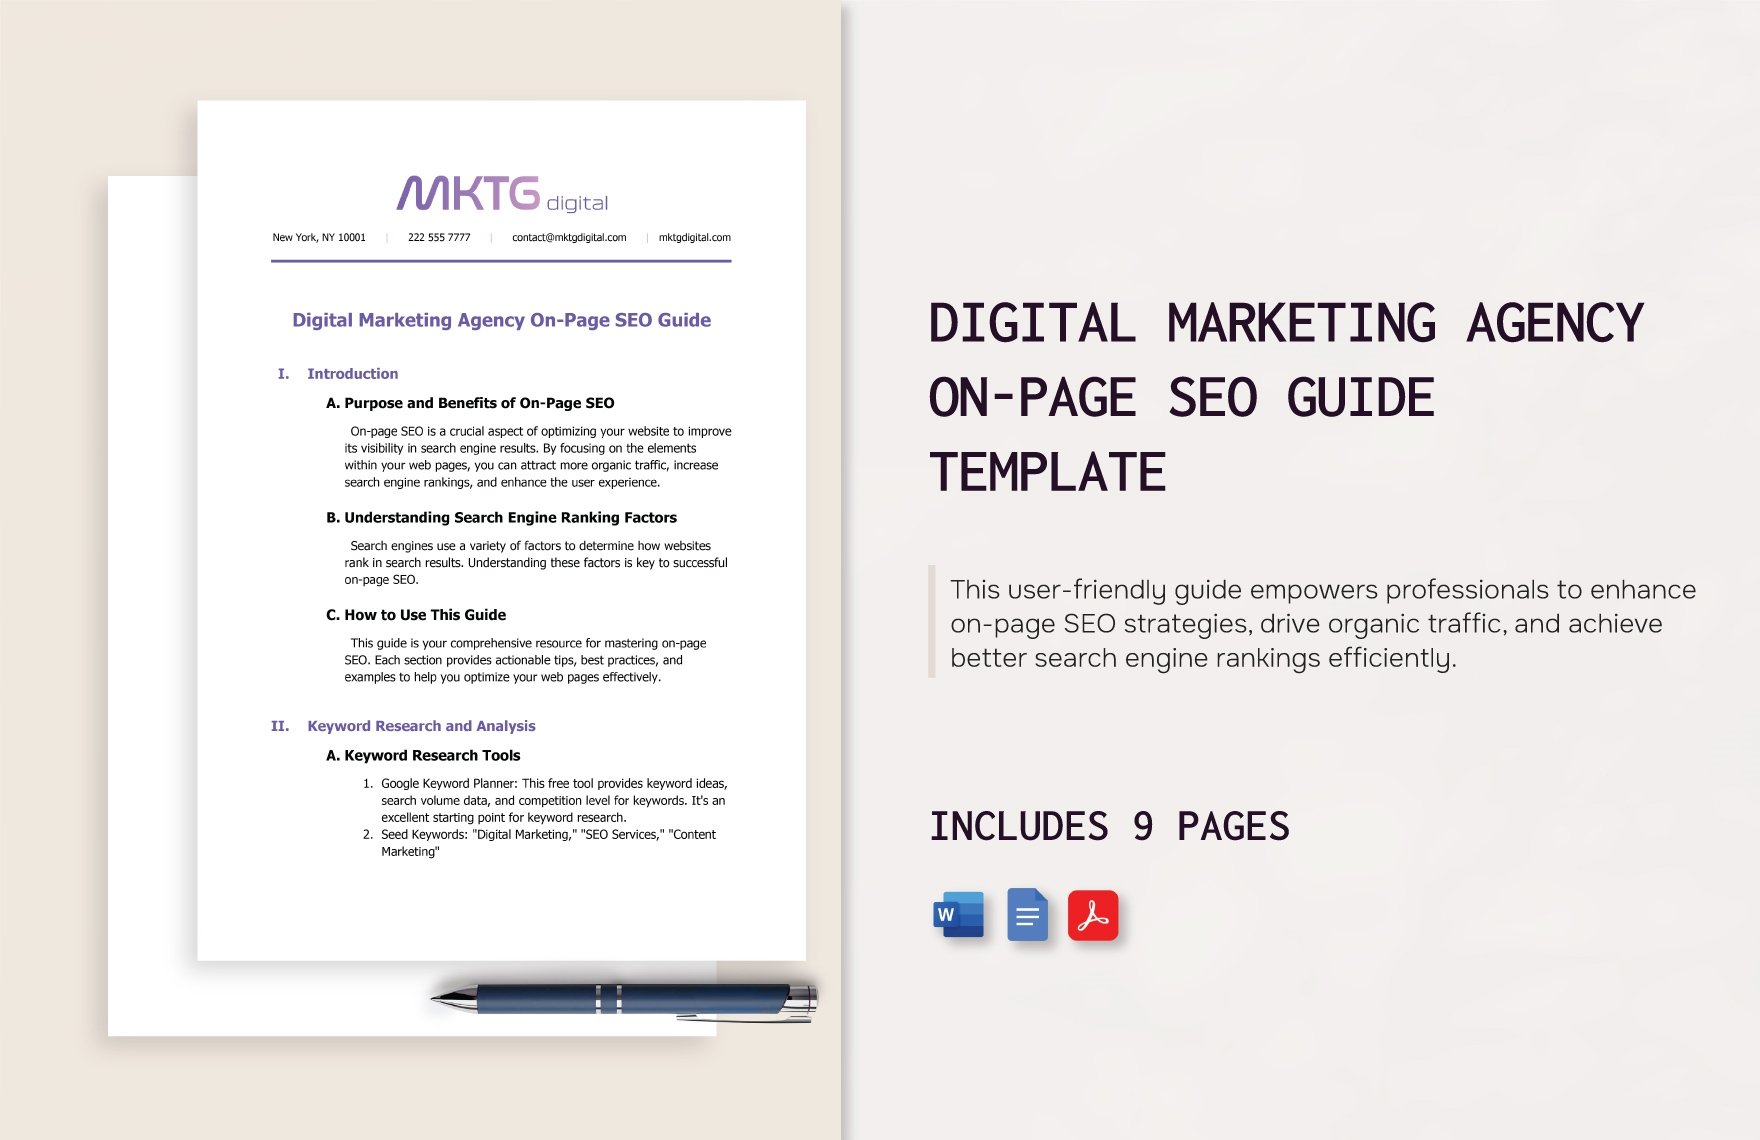 Digital Marketing Agency On-Page SEO Guide Template in Word, Google Docs, PDF